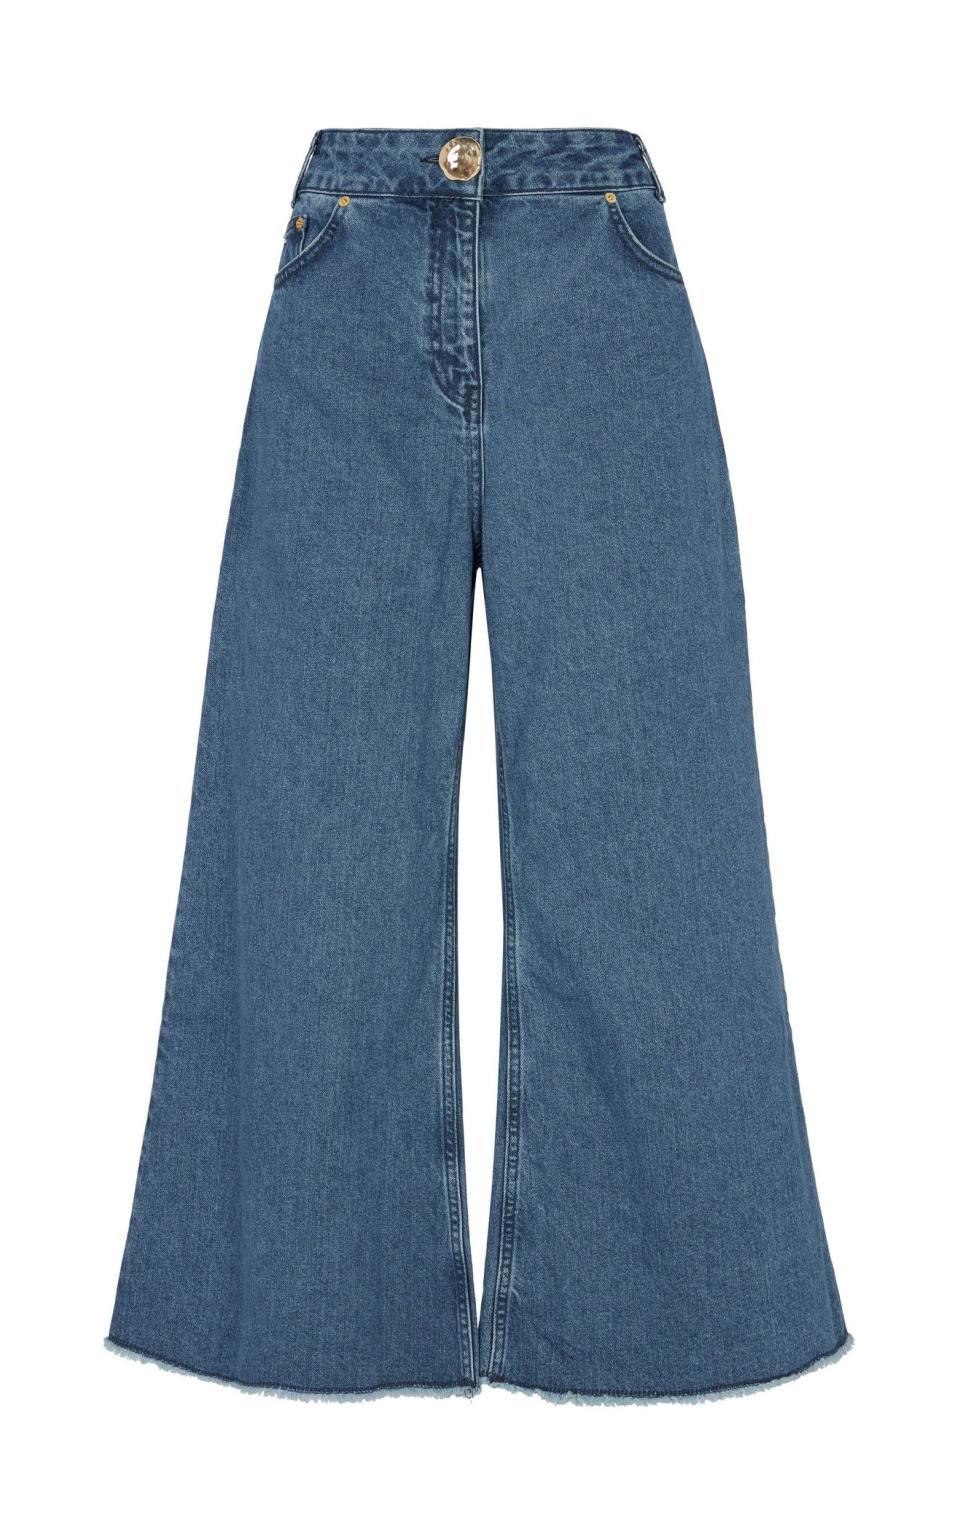 Chloe Cropped Recycled Midwash Jeans, £195, Mother of Pearl